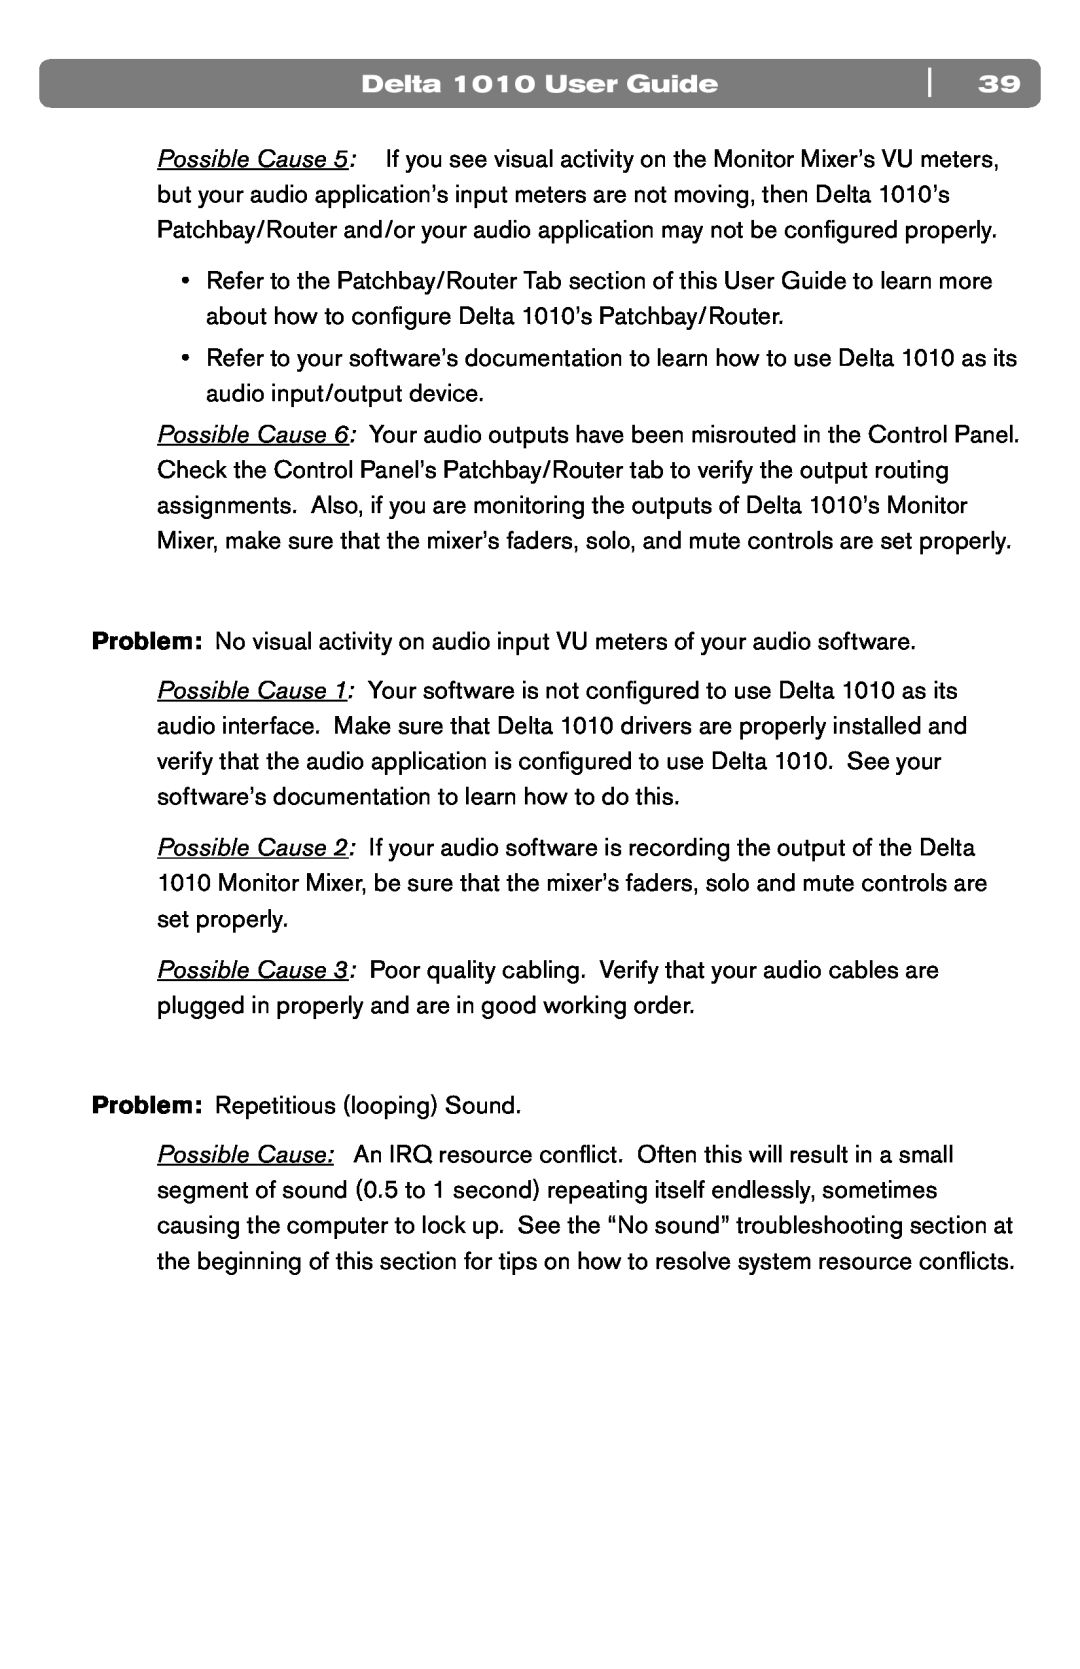 M-Audio DELTA 1010 manual Delta 1010 User Guide, Problem Repetitious looping Sound 